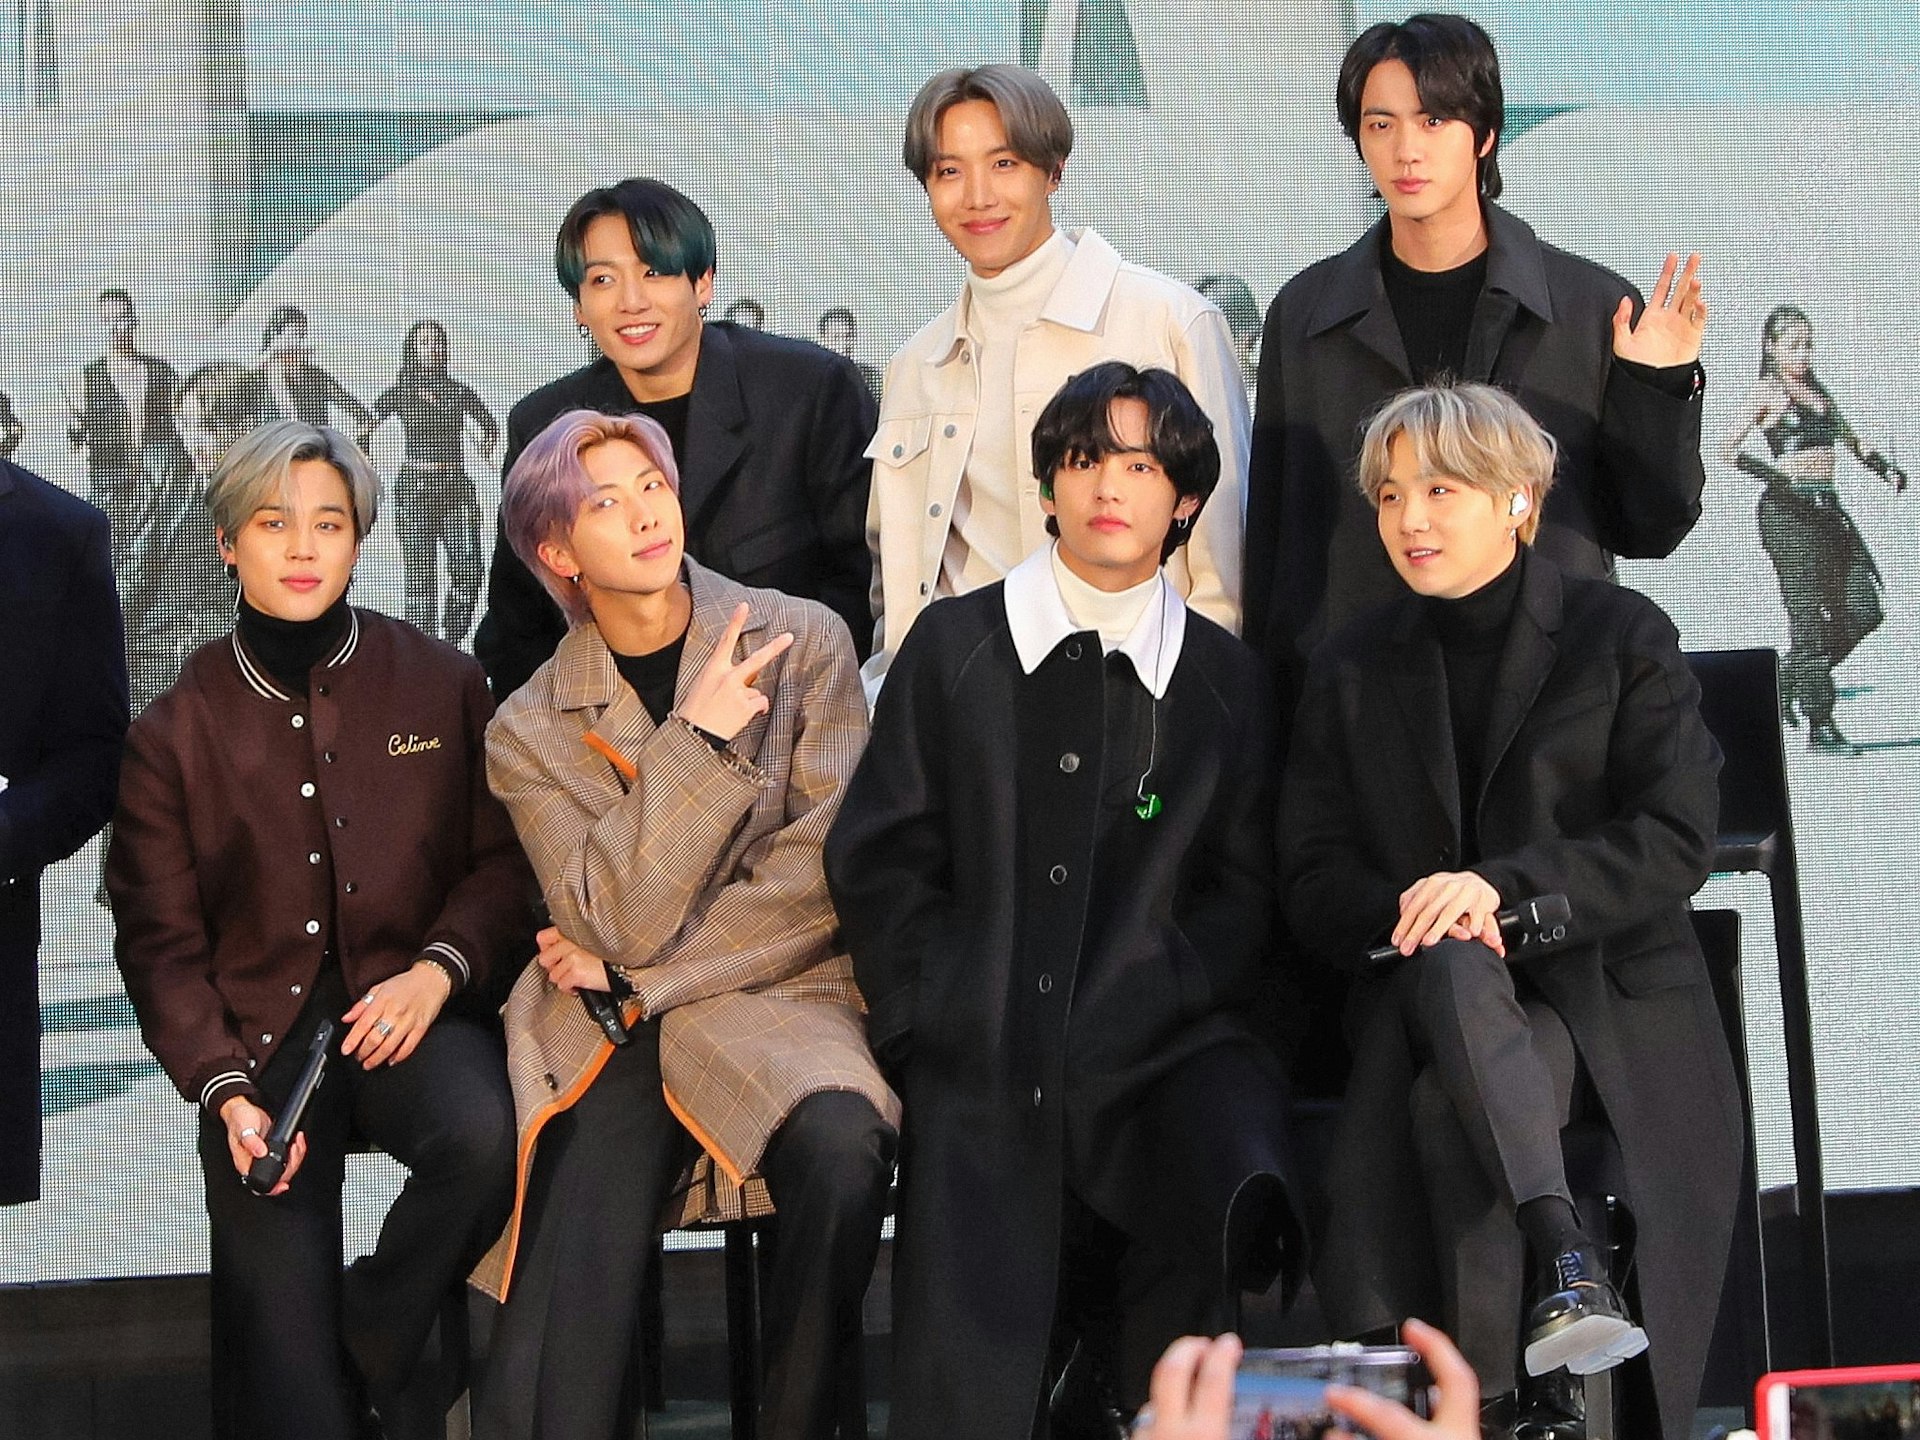 The seven members of K-Pop boy band BTS pose in front of a video screen.